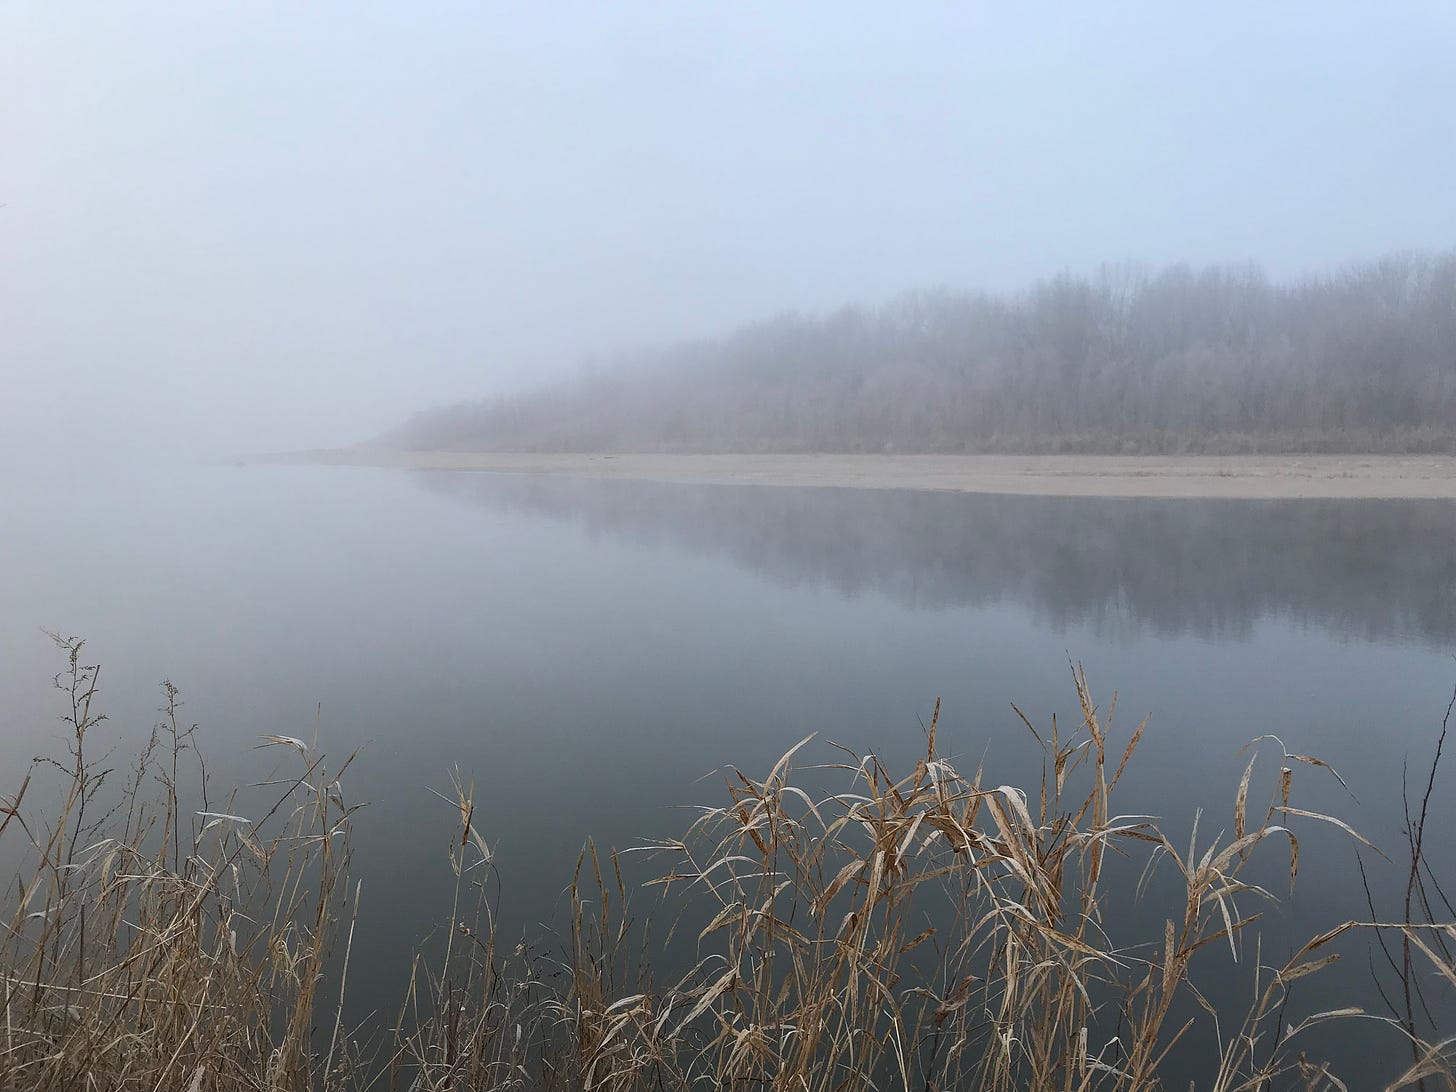 The Iowa River on a foggy day